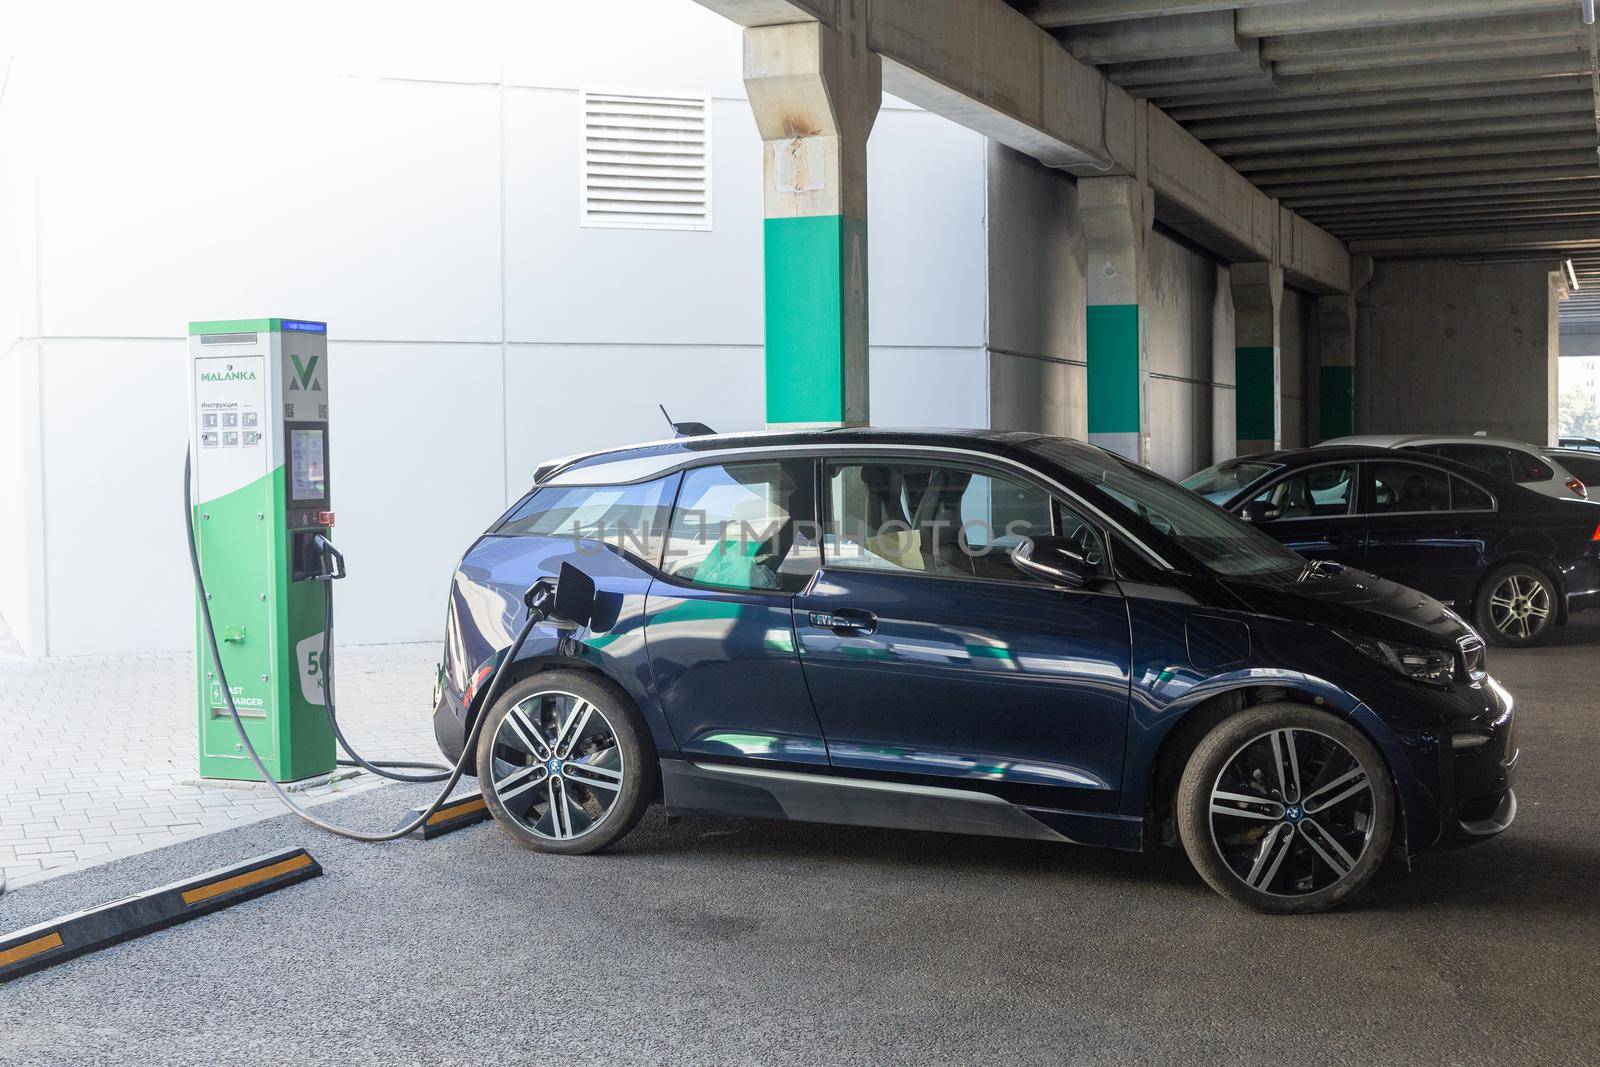 Grodno, Belarus - September 09, 2022: BMW i3 on 50kW fast charging spot Malanka on parking of the Triniti shoping mall - Car sharing commuter charging station. Charging technology industry transport which are the futuristic of the Automobile.